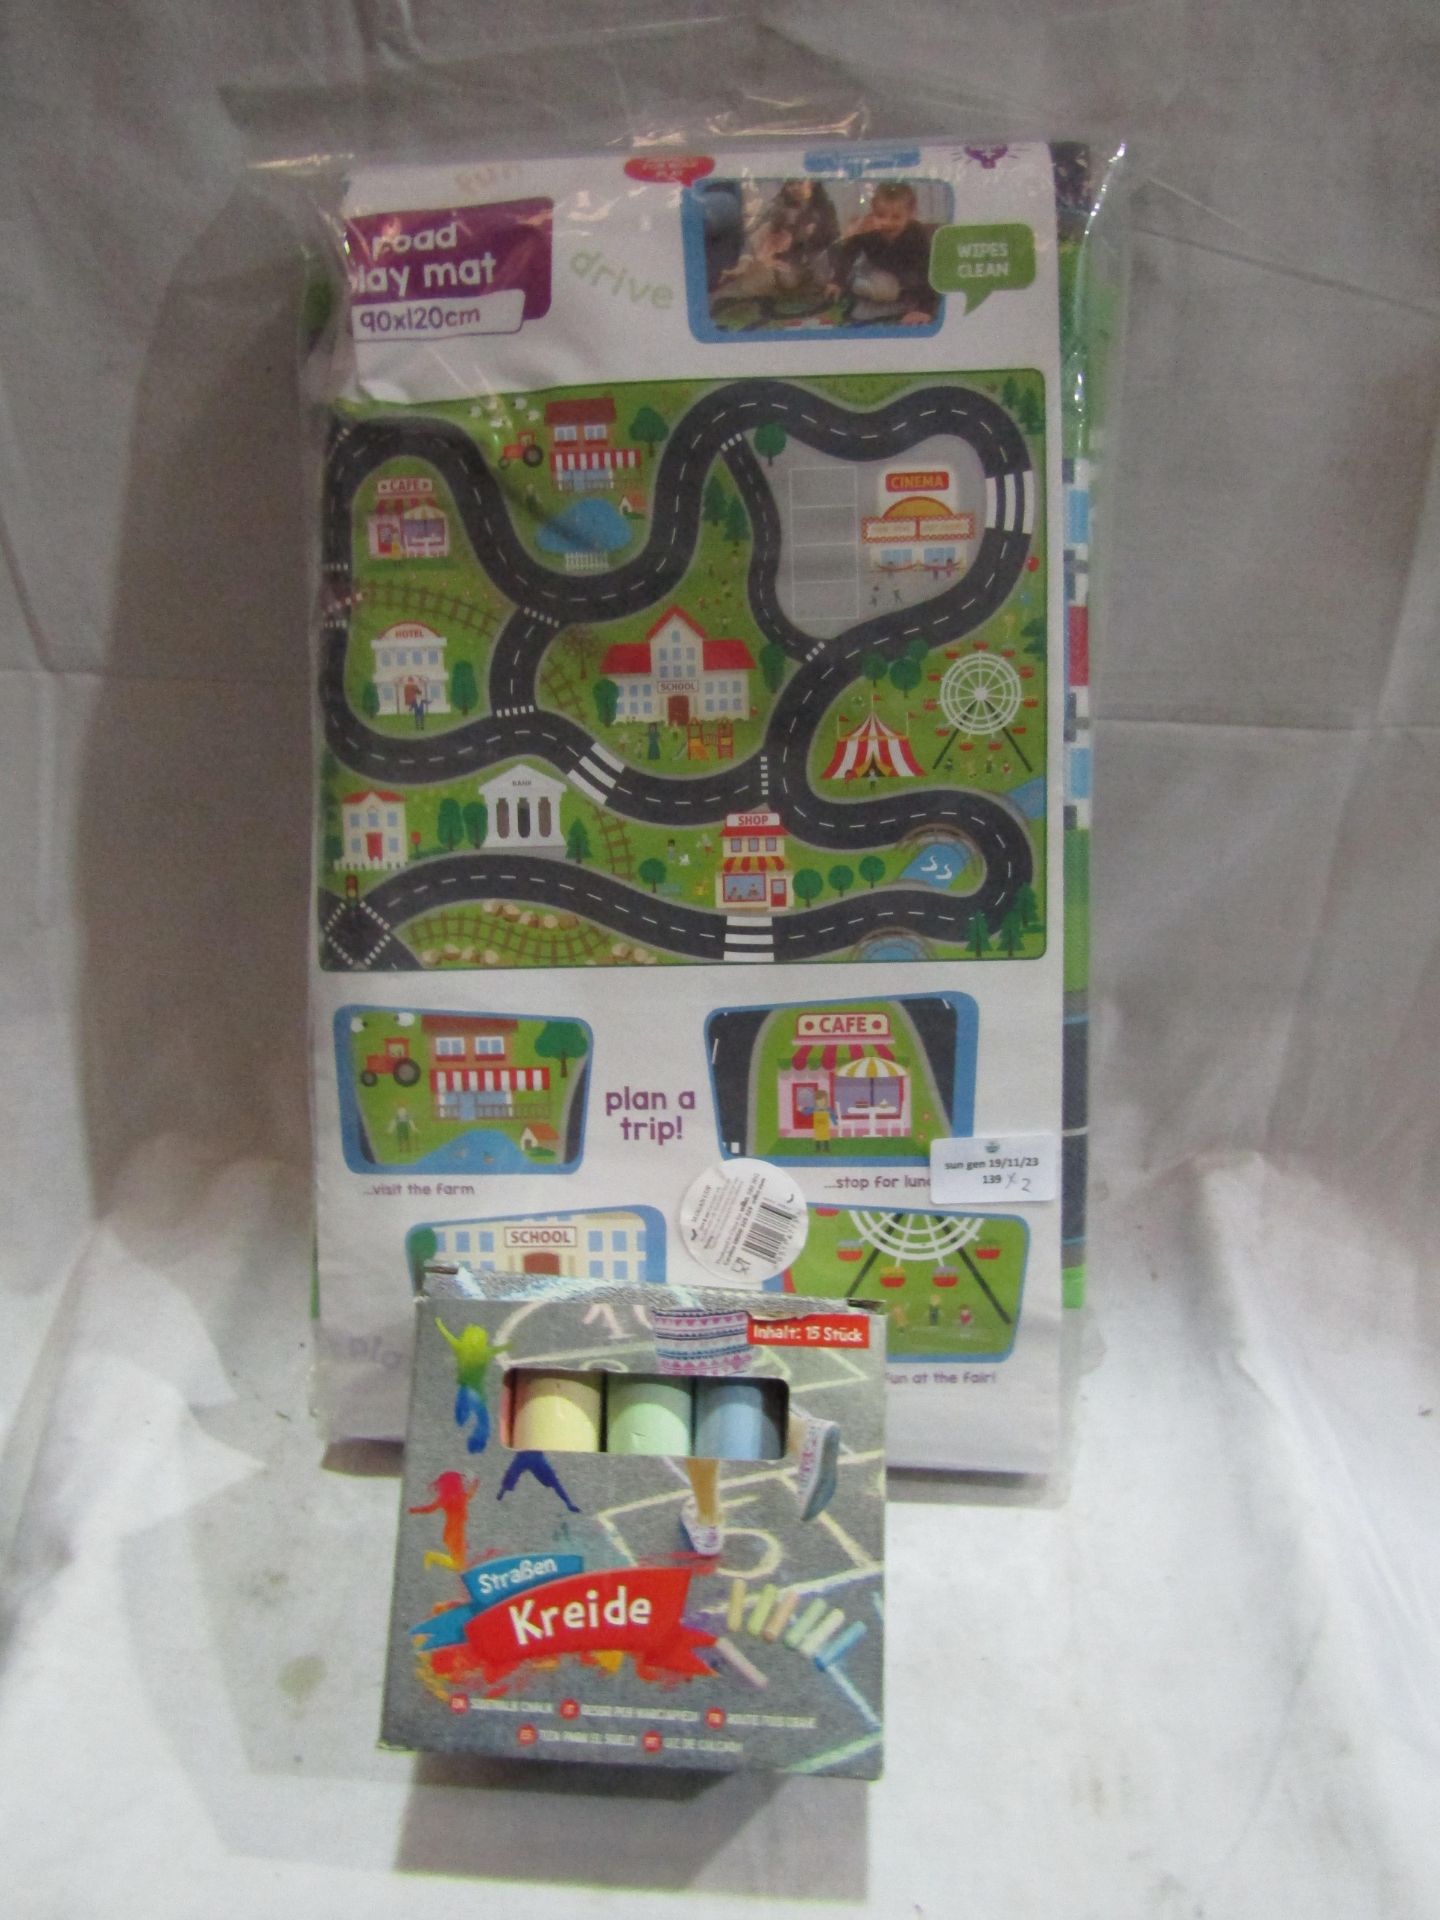 2 X Items Being 1 Box of 15 Chunky Chalk Sticks & 1 x Road Play mat Unchecked & Packaged